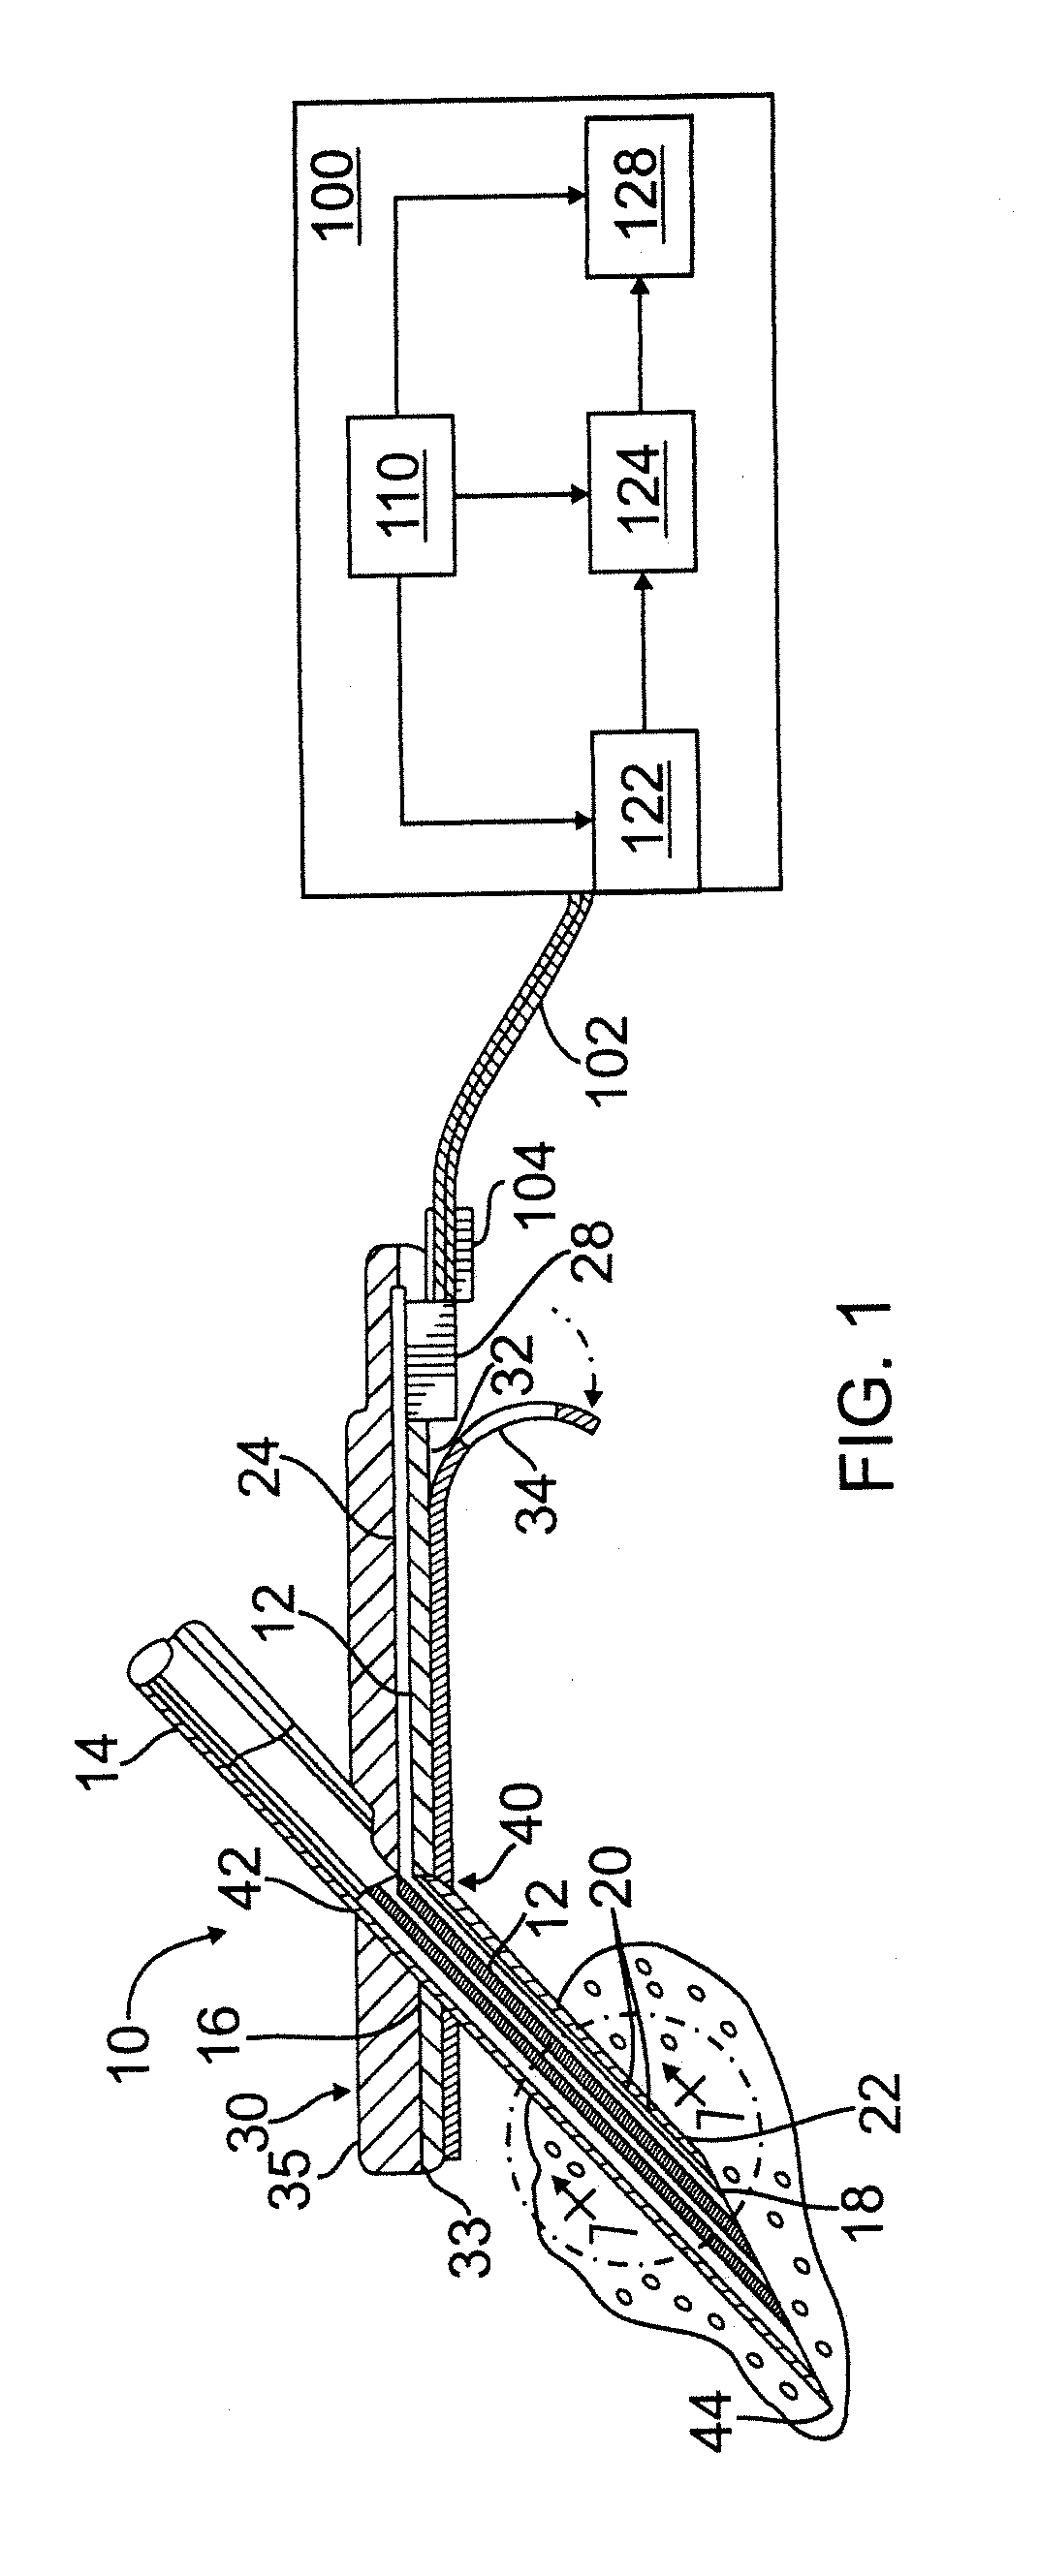 Methods and systems for observing sensor parameters